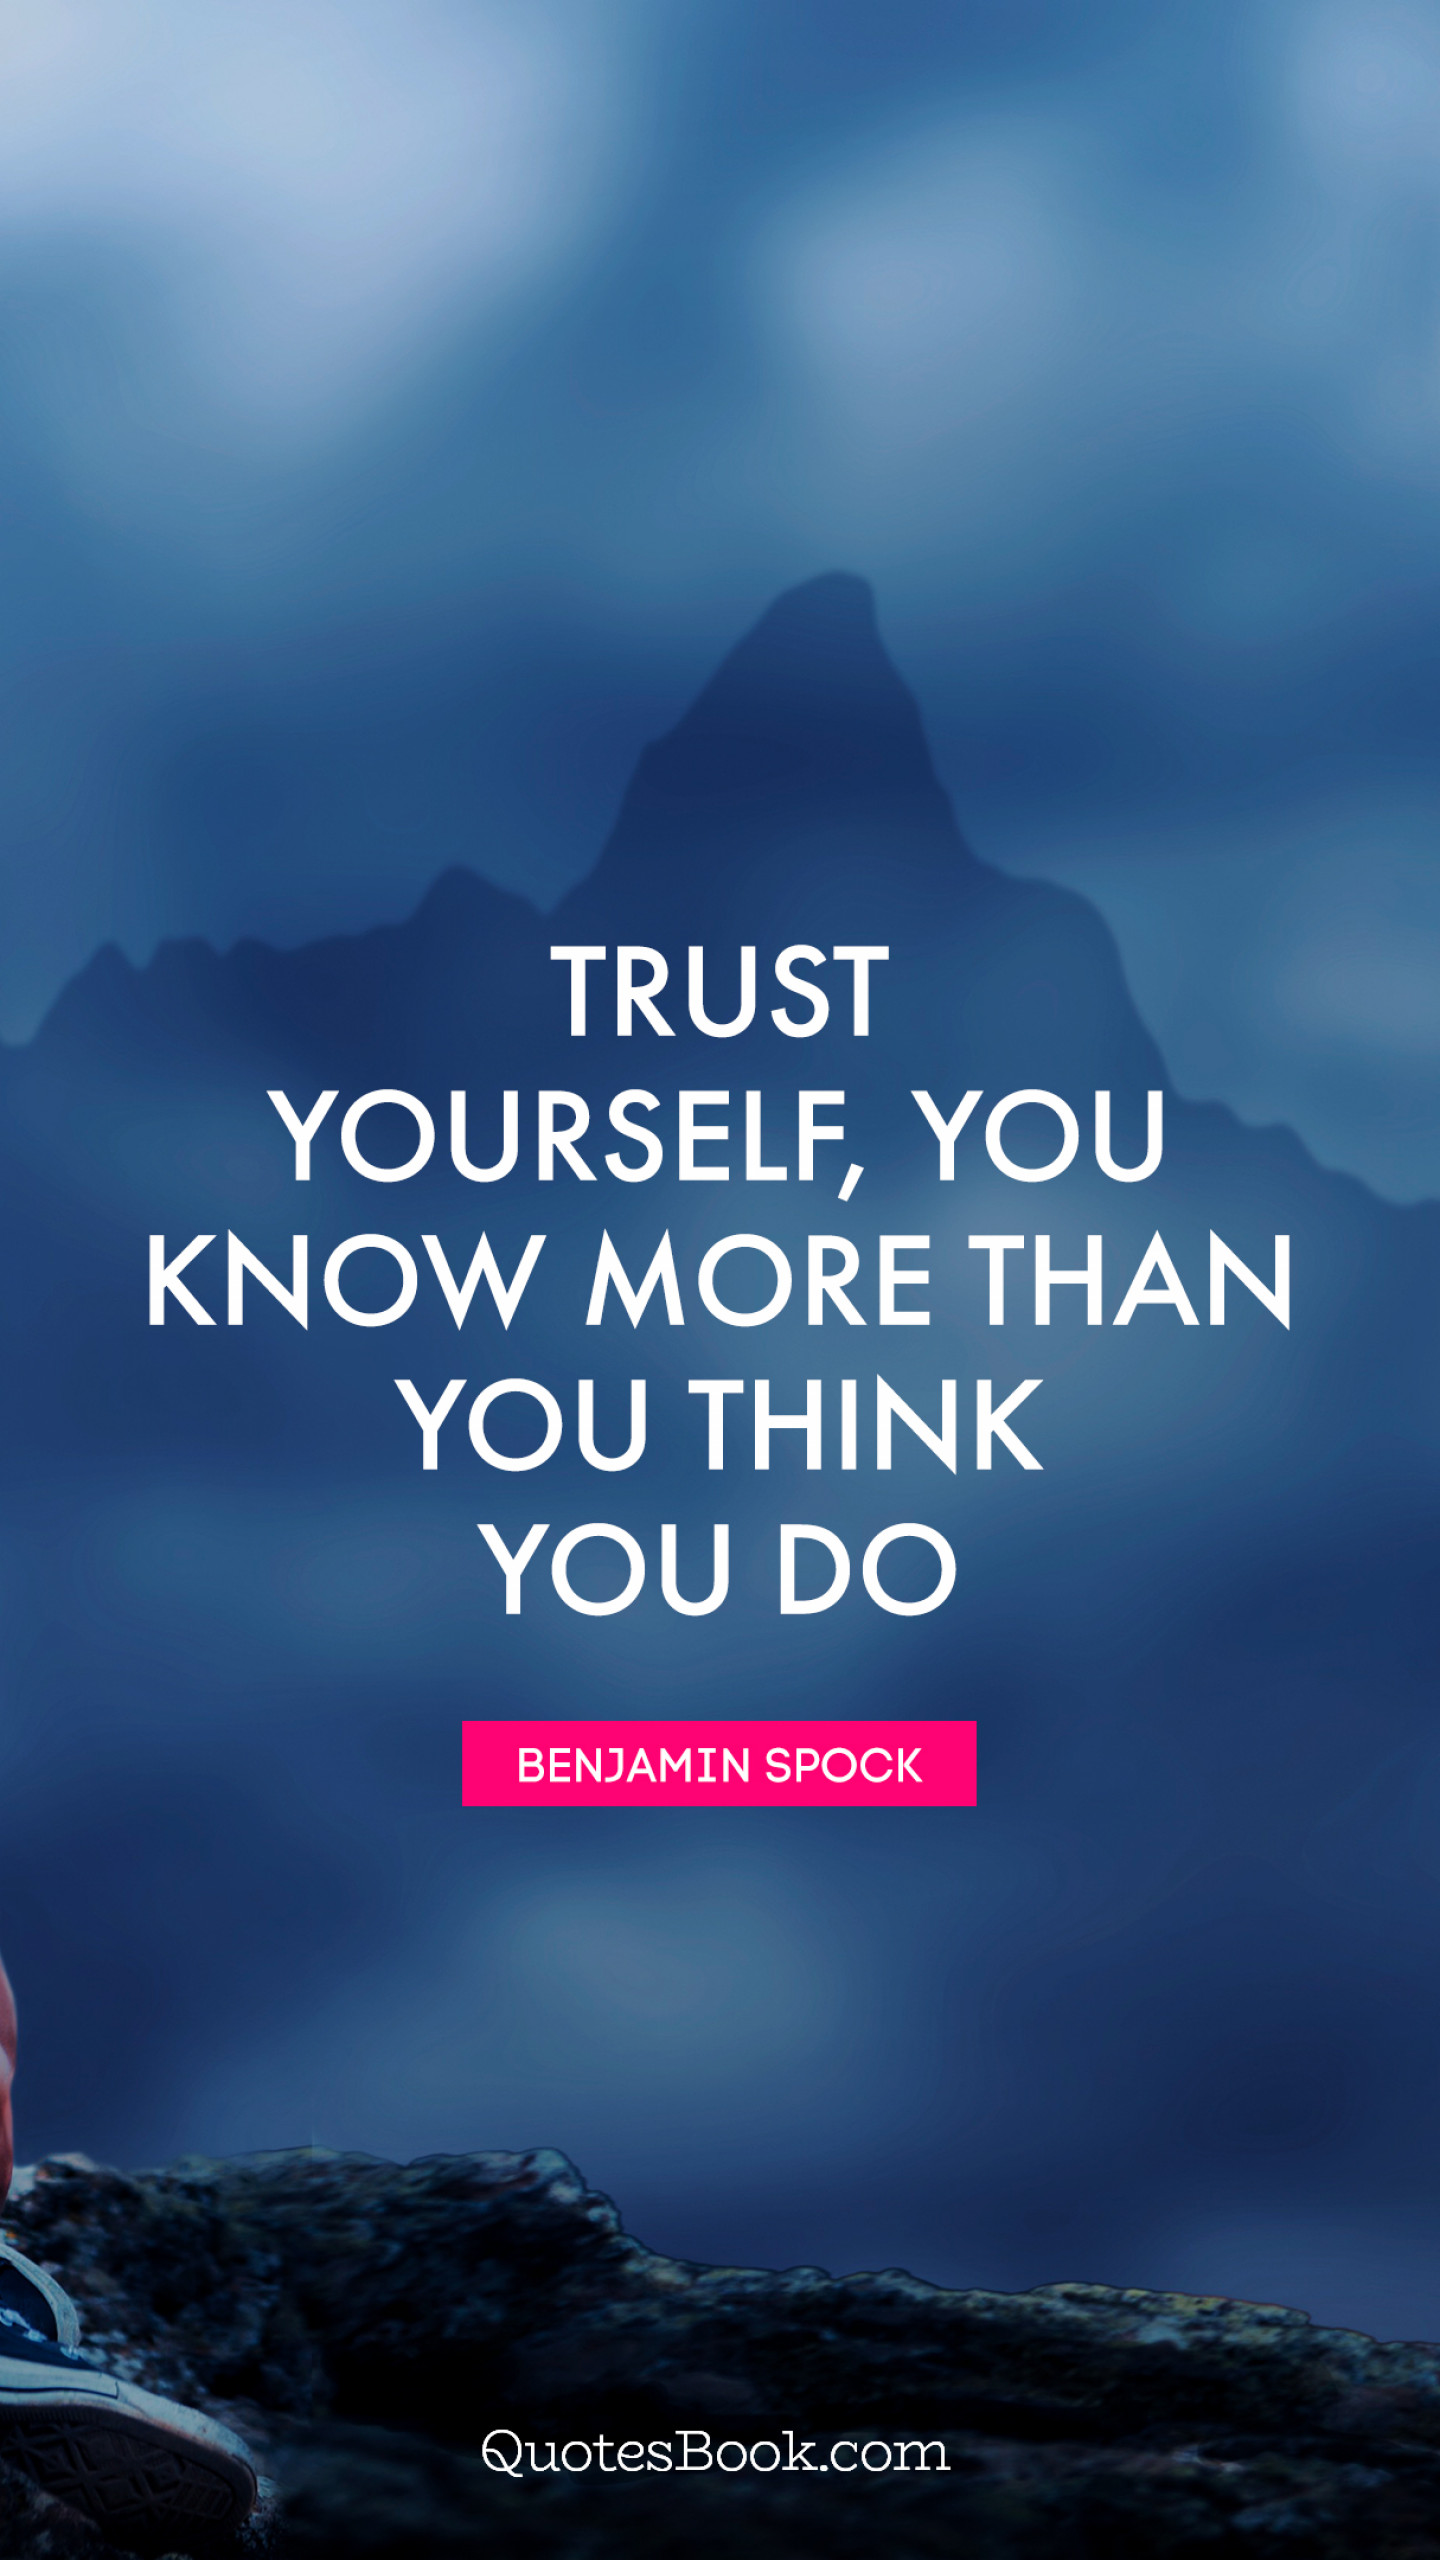 trust yourself you know more than you think you do 1440x2560 1037